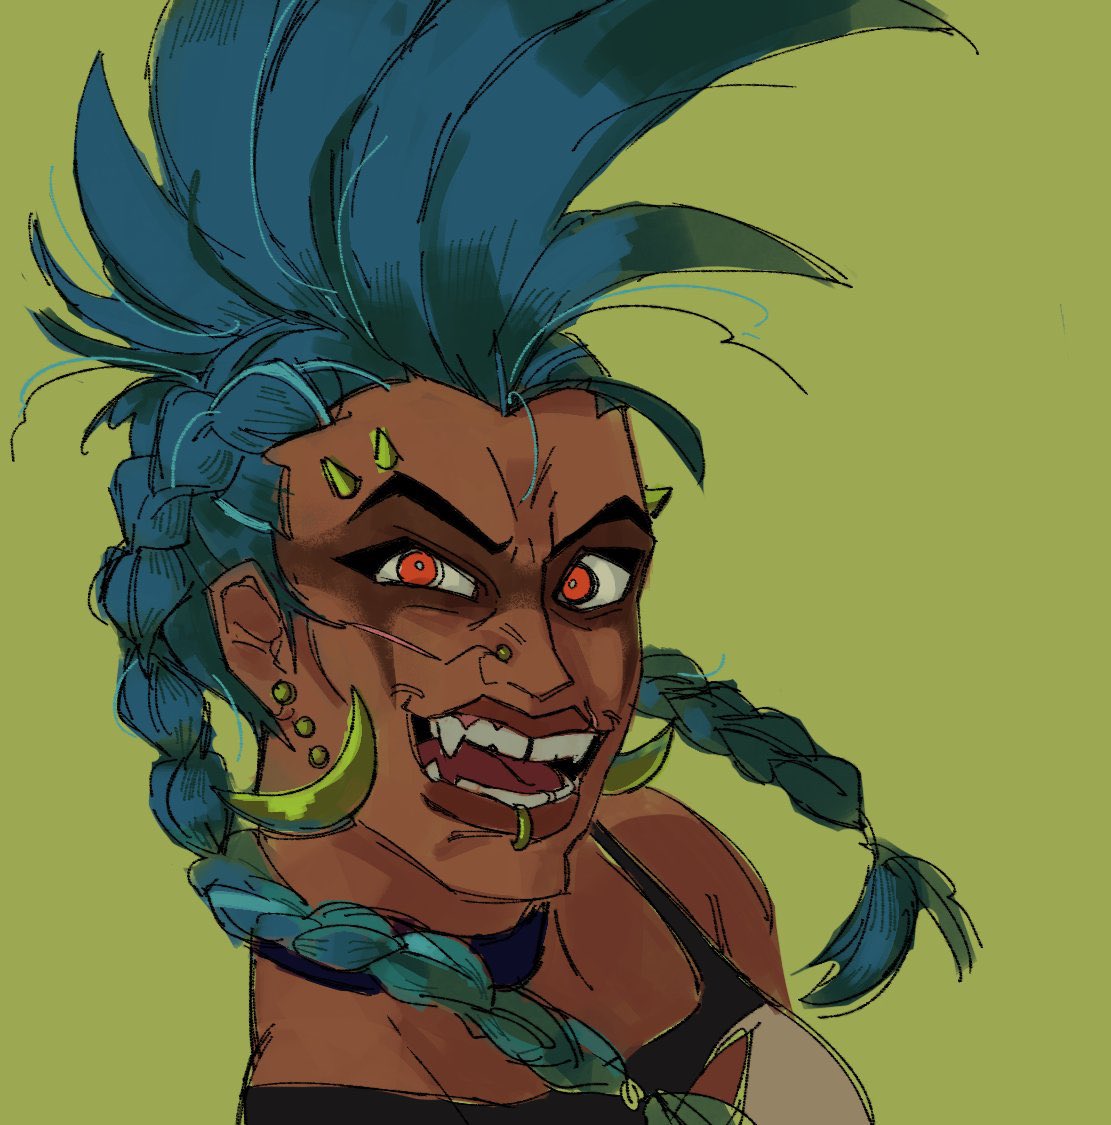 Also here’s my old one also drawn by @HrtMoira 🫶 #junkerqueen